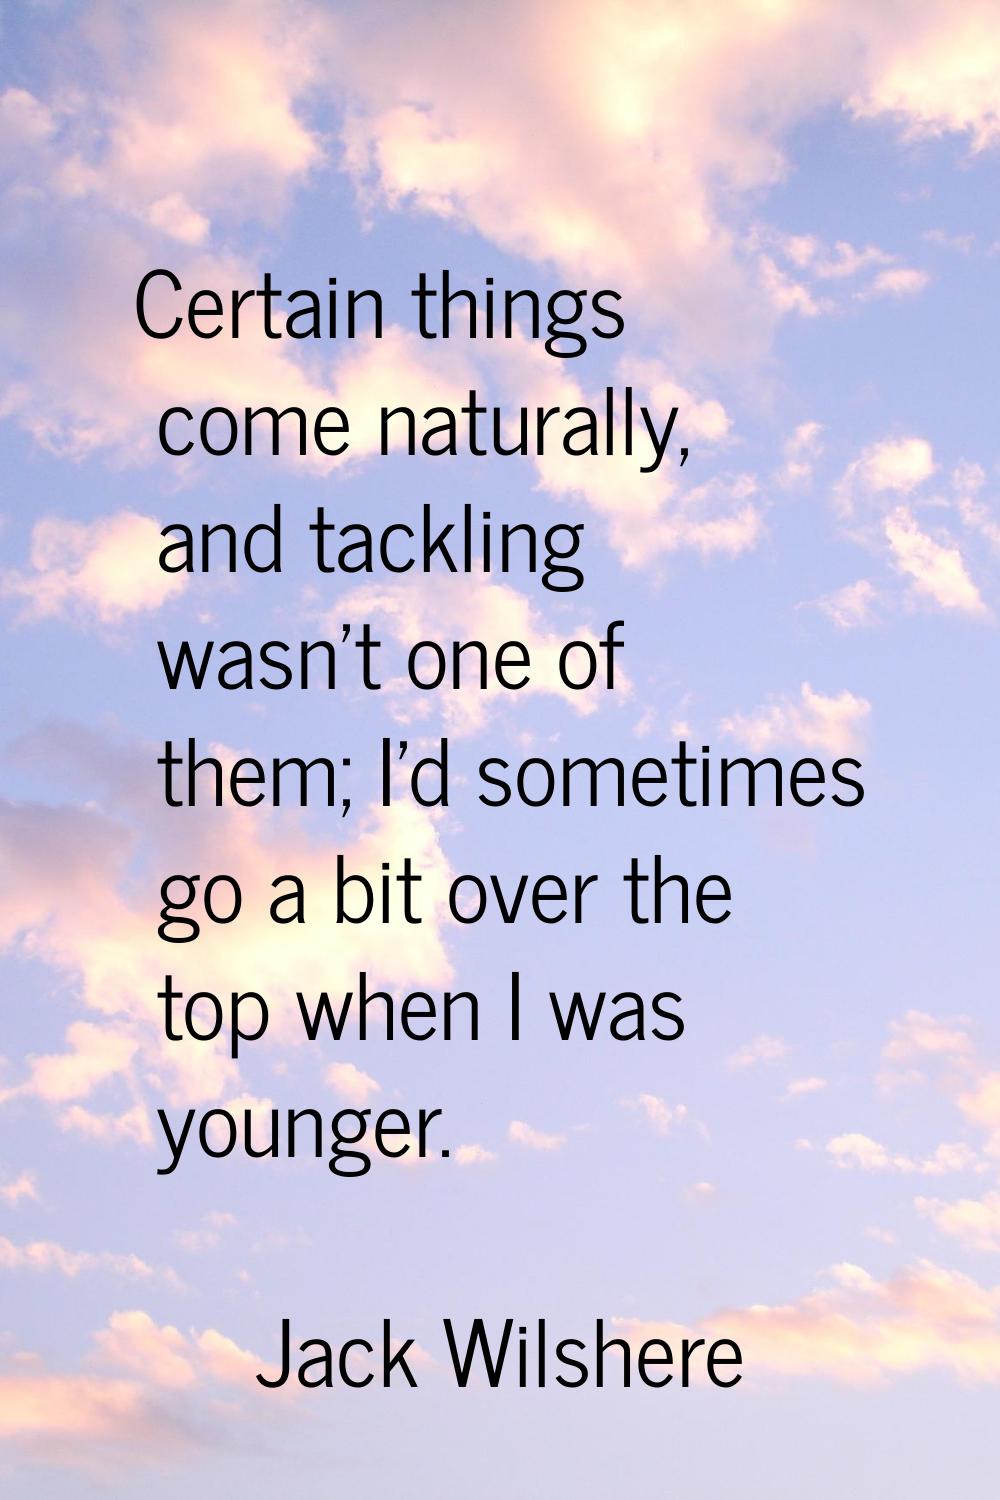 Certain things come naturally, and tackling wasn't one of them; I'd sometimes go a bit over the top